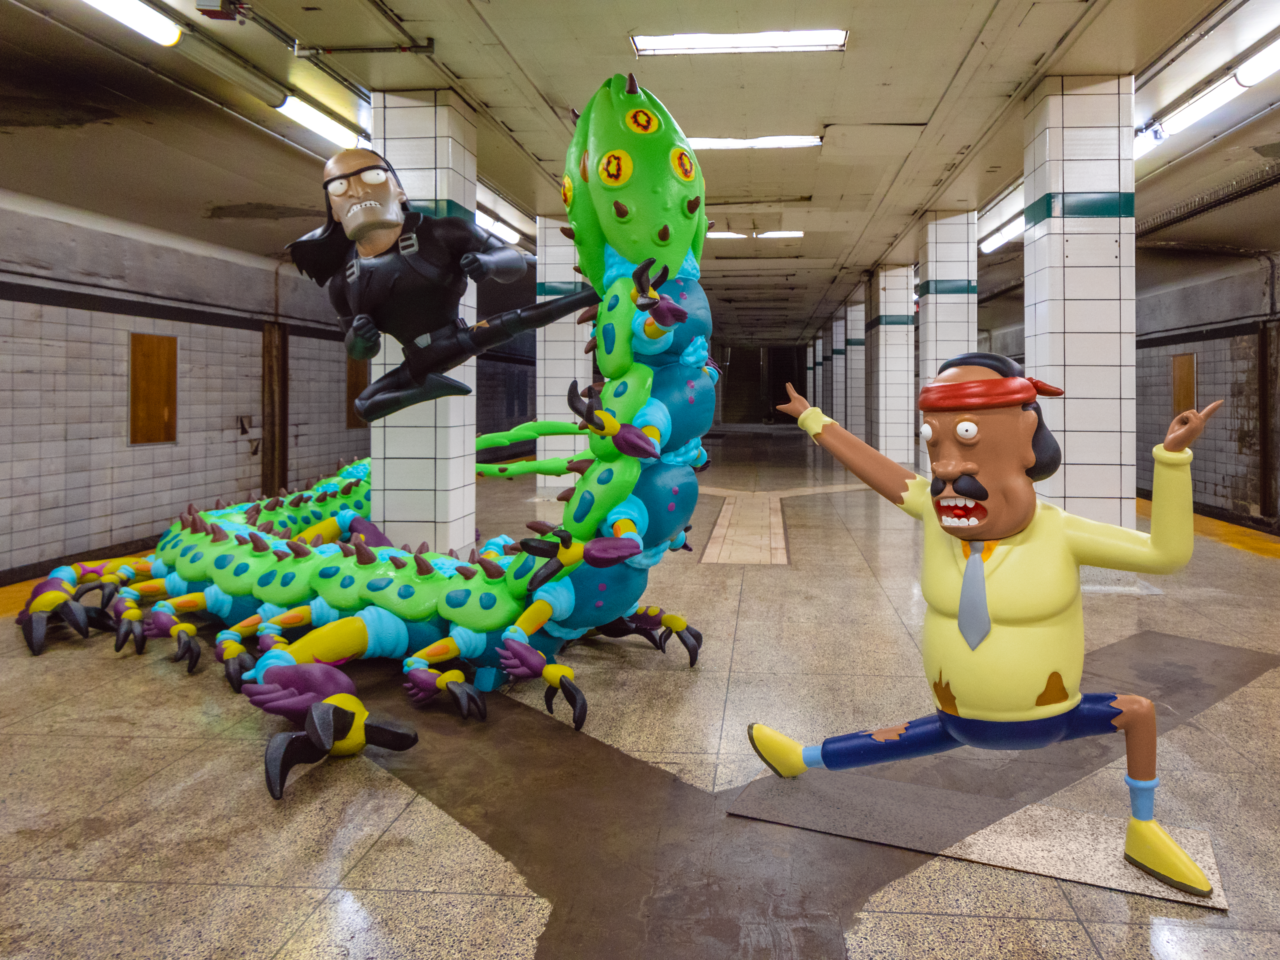 A sculpture of Rick and Morty character Mr. Goldenfold at the Lower Bay Station in Toronto, Canada. The scene is part of the ongoing #WORMAGEDDON fan experience leading to the global release of Adult Swim’s Rick and Morty season six starting September 4, 2022. (Courtesy Adult Swim)